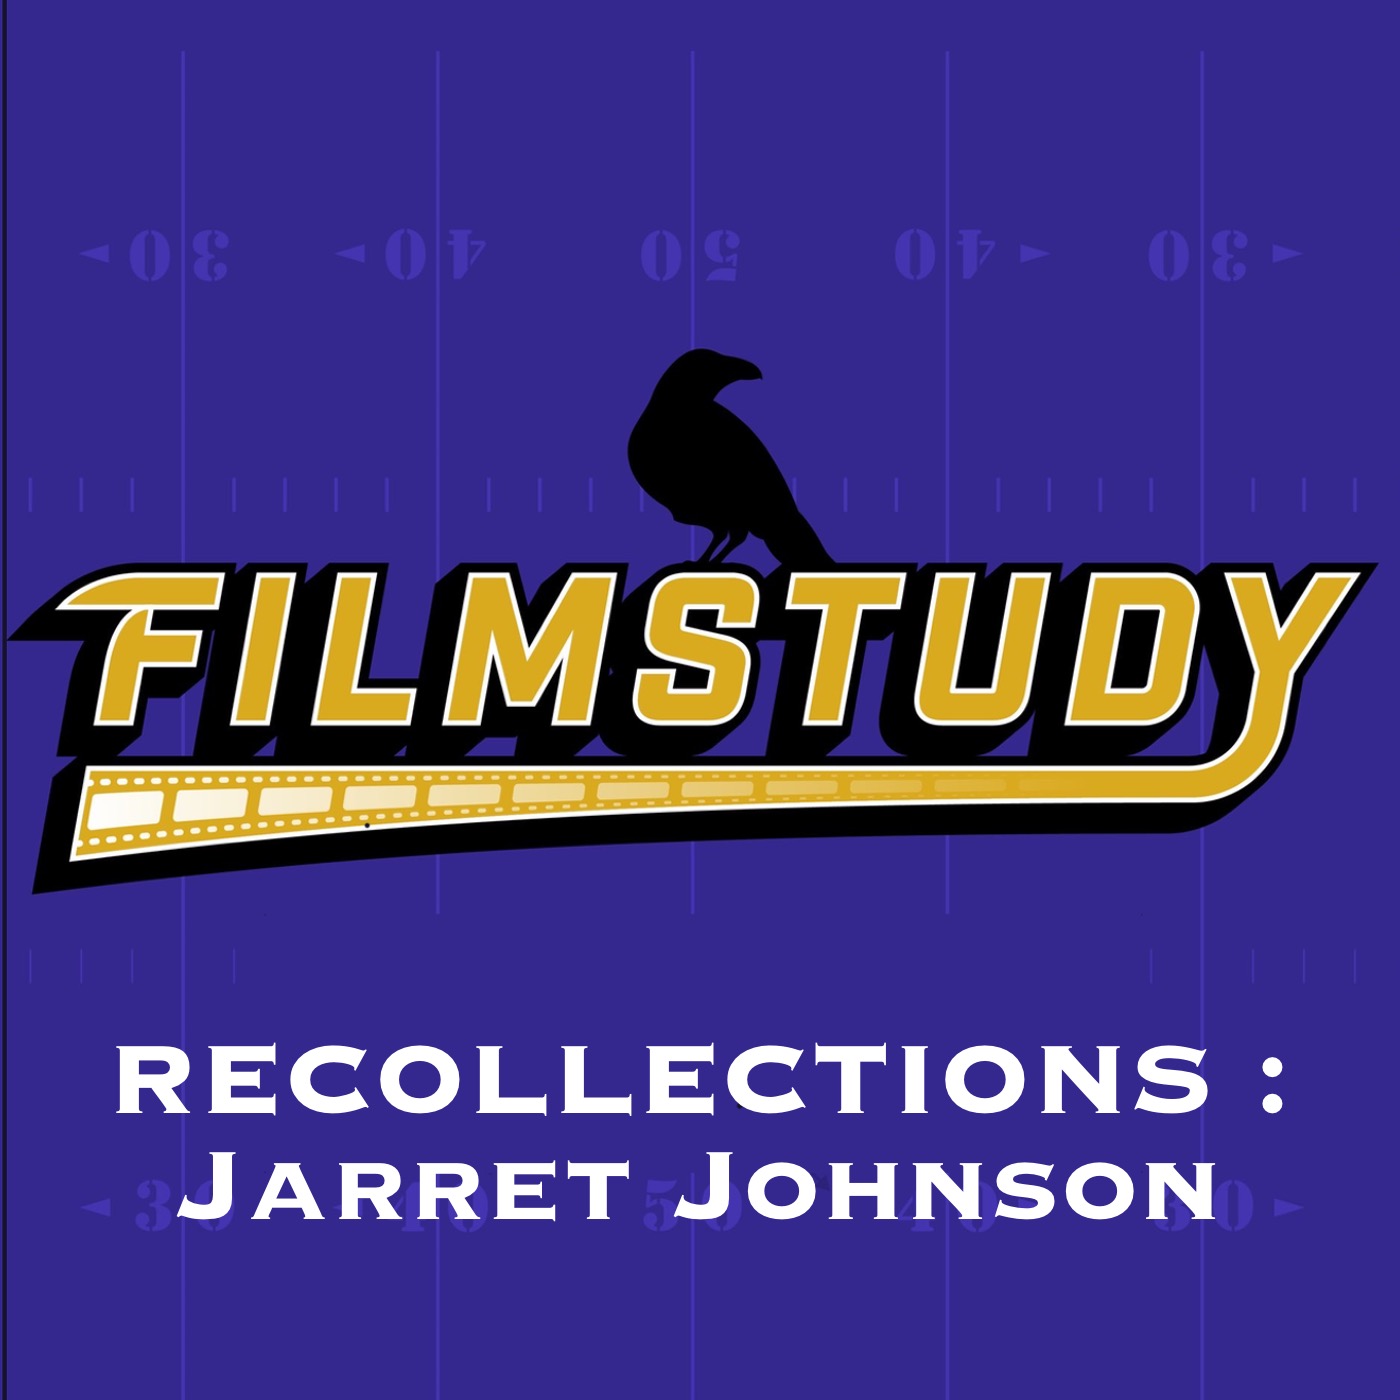 Recollections : Jarret Johnson